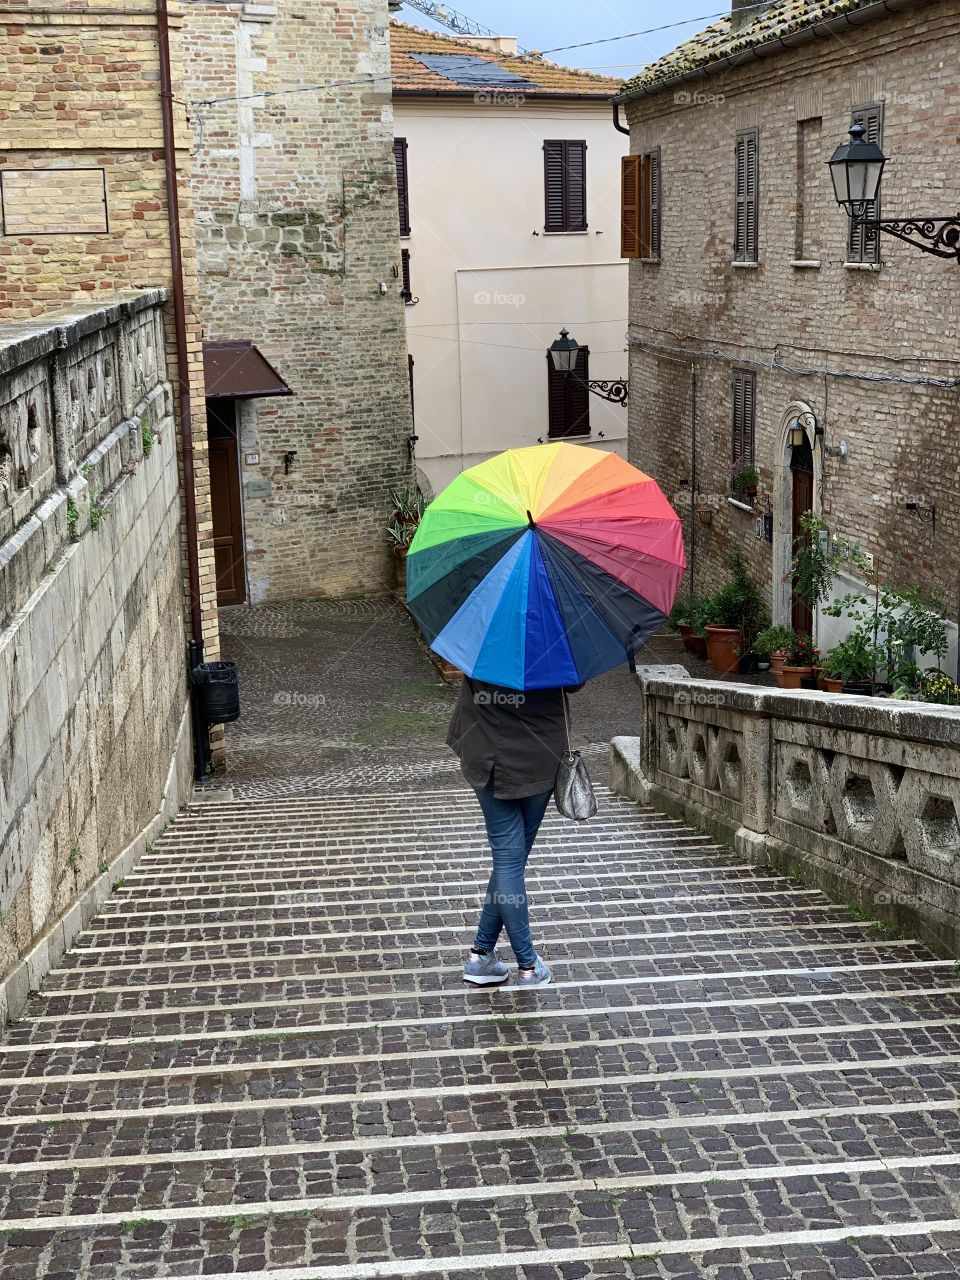 Discovering an old village during a rainy day with a rainbow colored umbrella